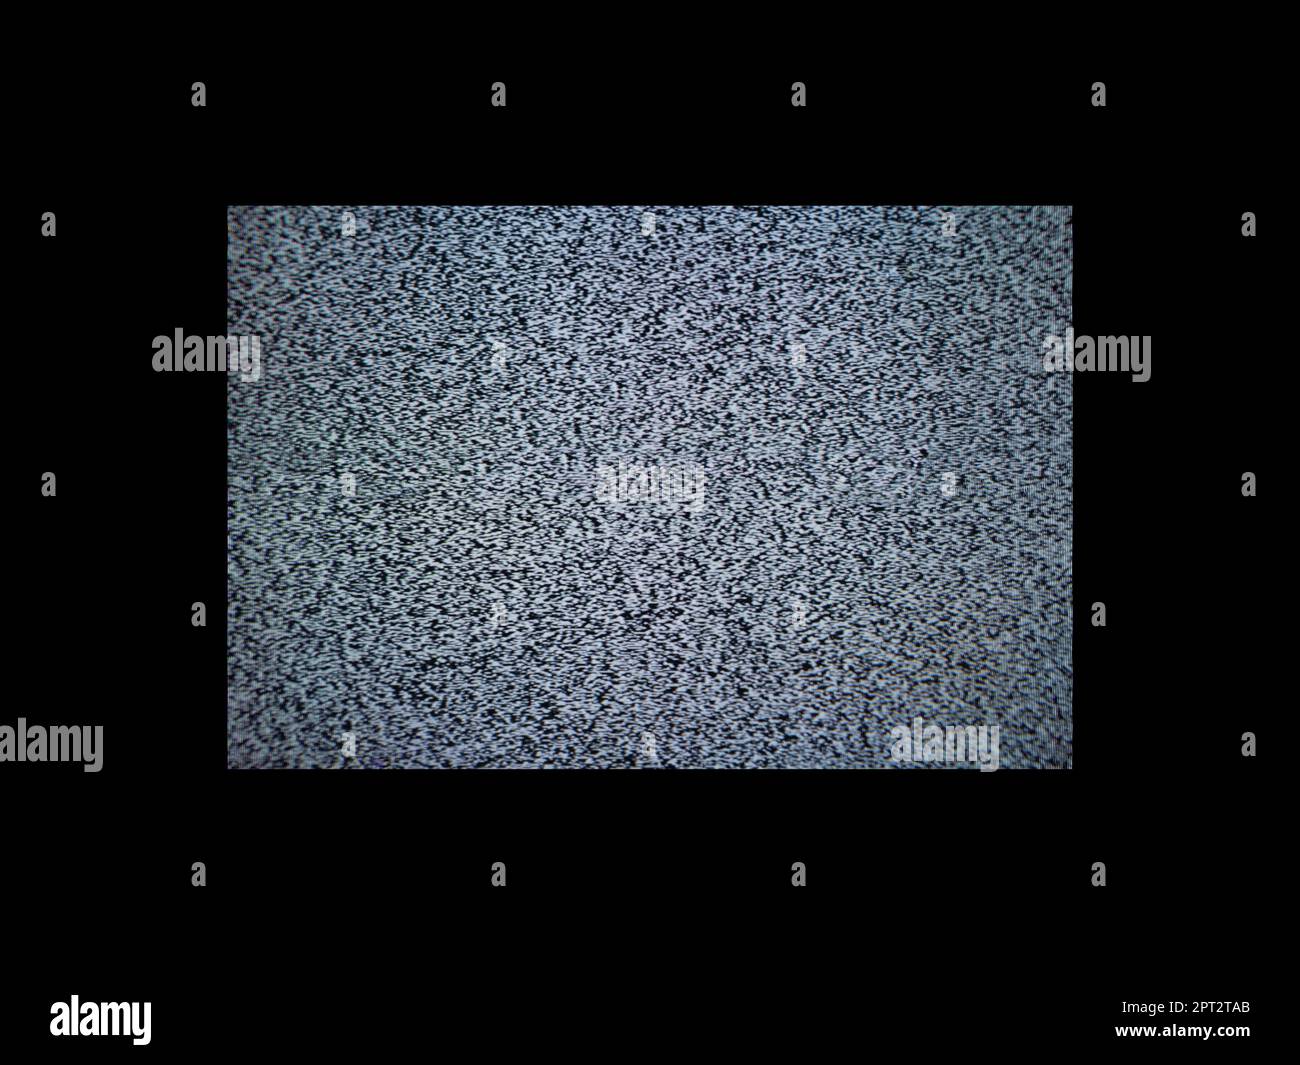 Television noise, interference on a black background Stock Photo